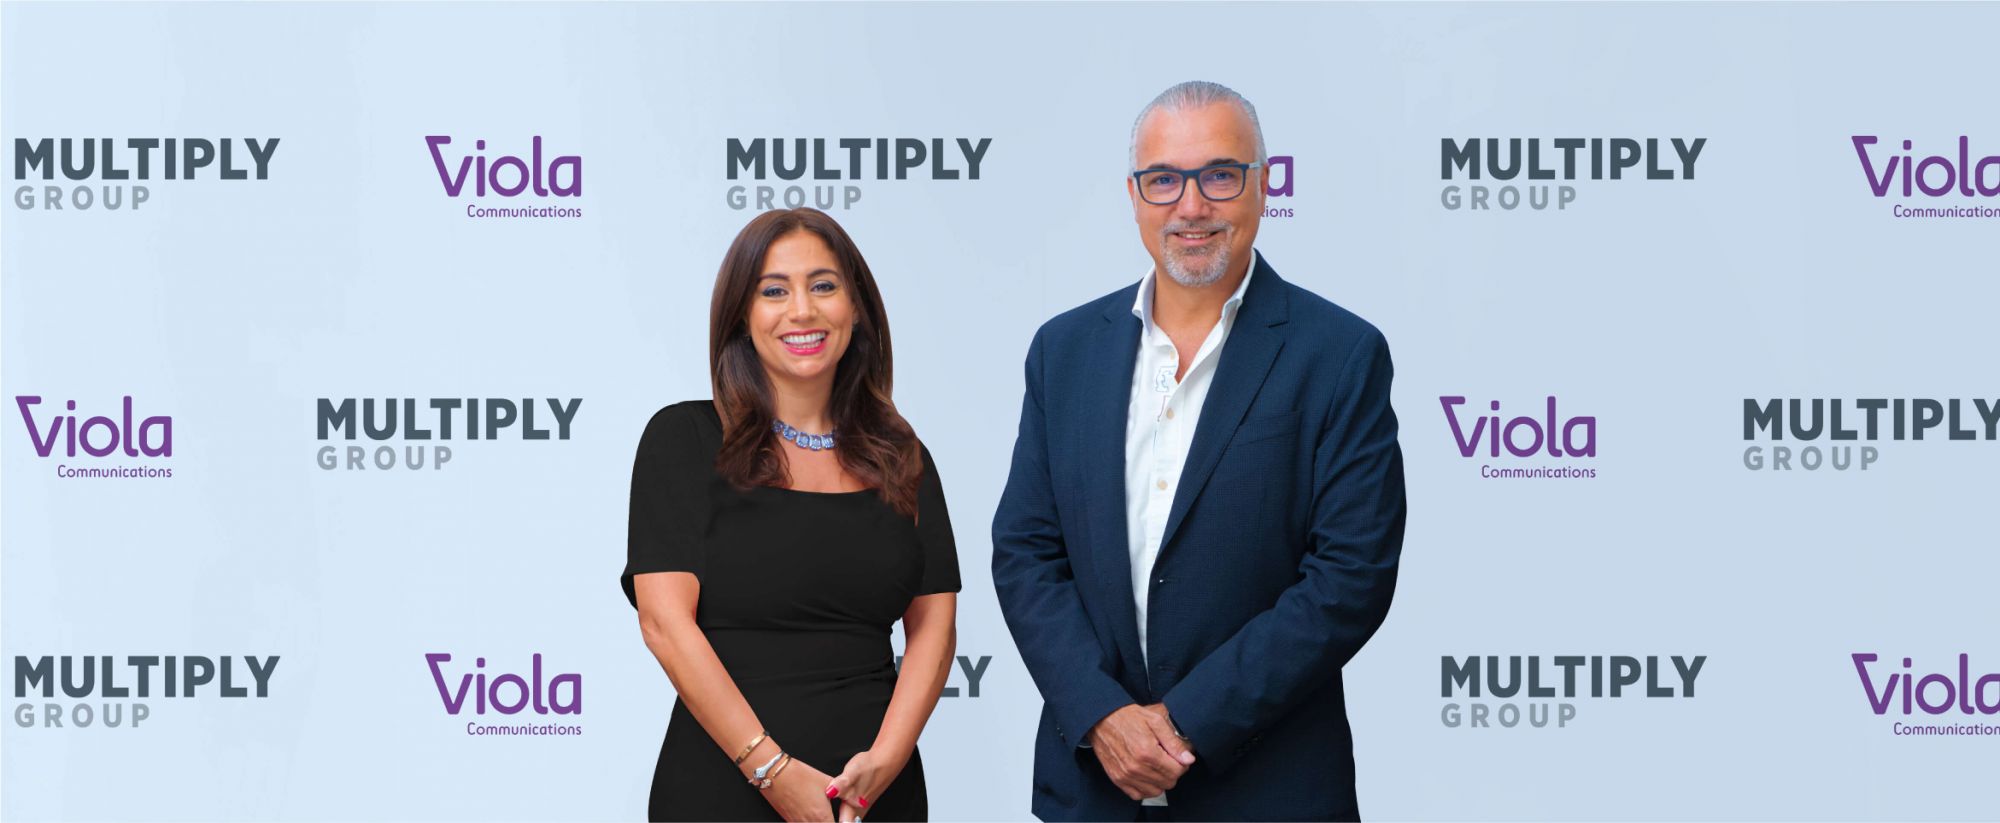 Multiply Group acquires UAE marketing and communications firm Viola Communications